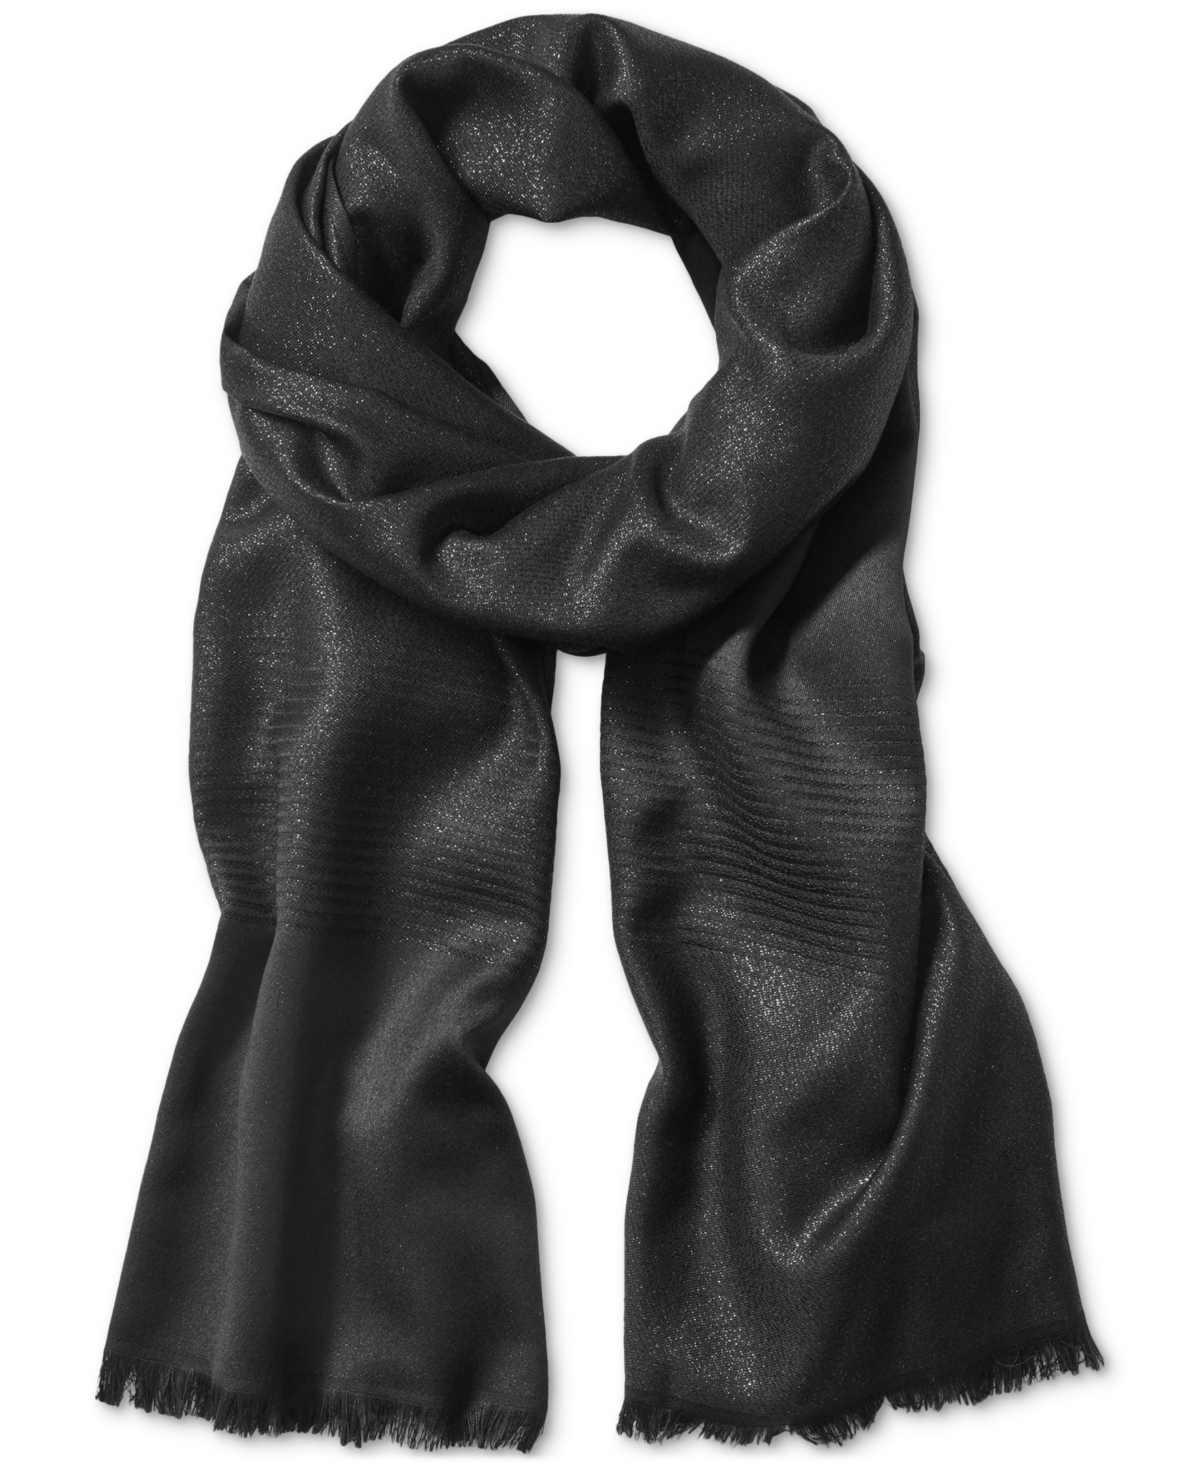 Women's Ombre Shimmer Scarf - Black